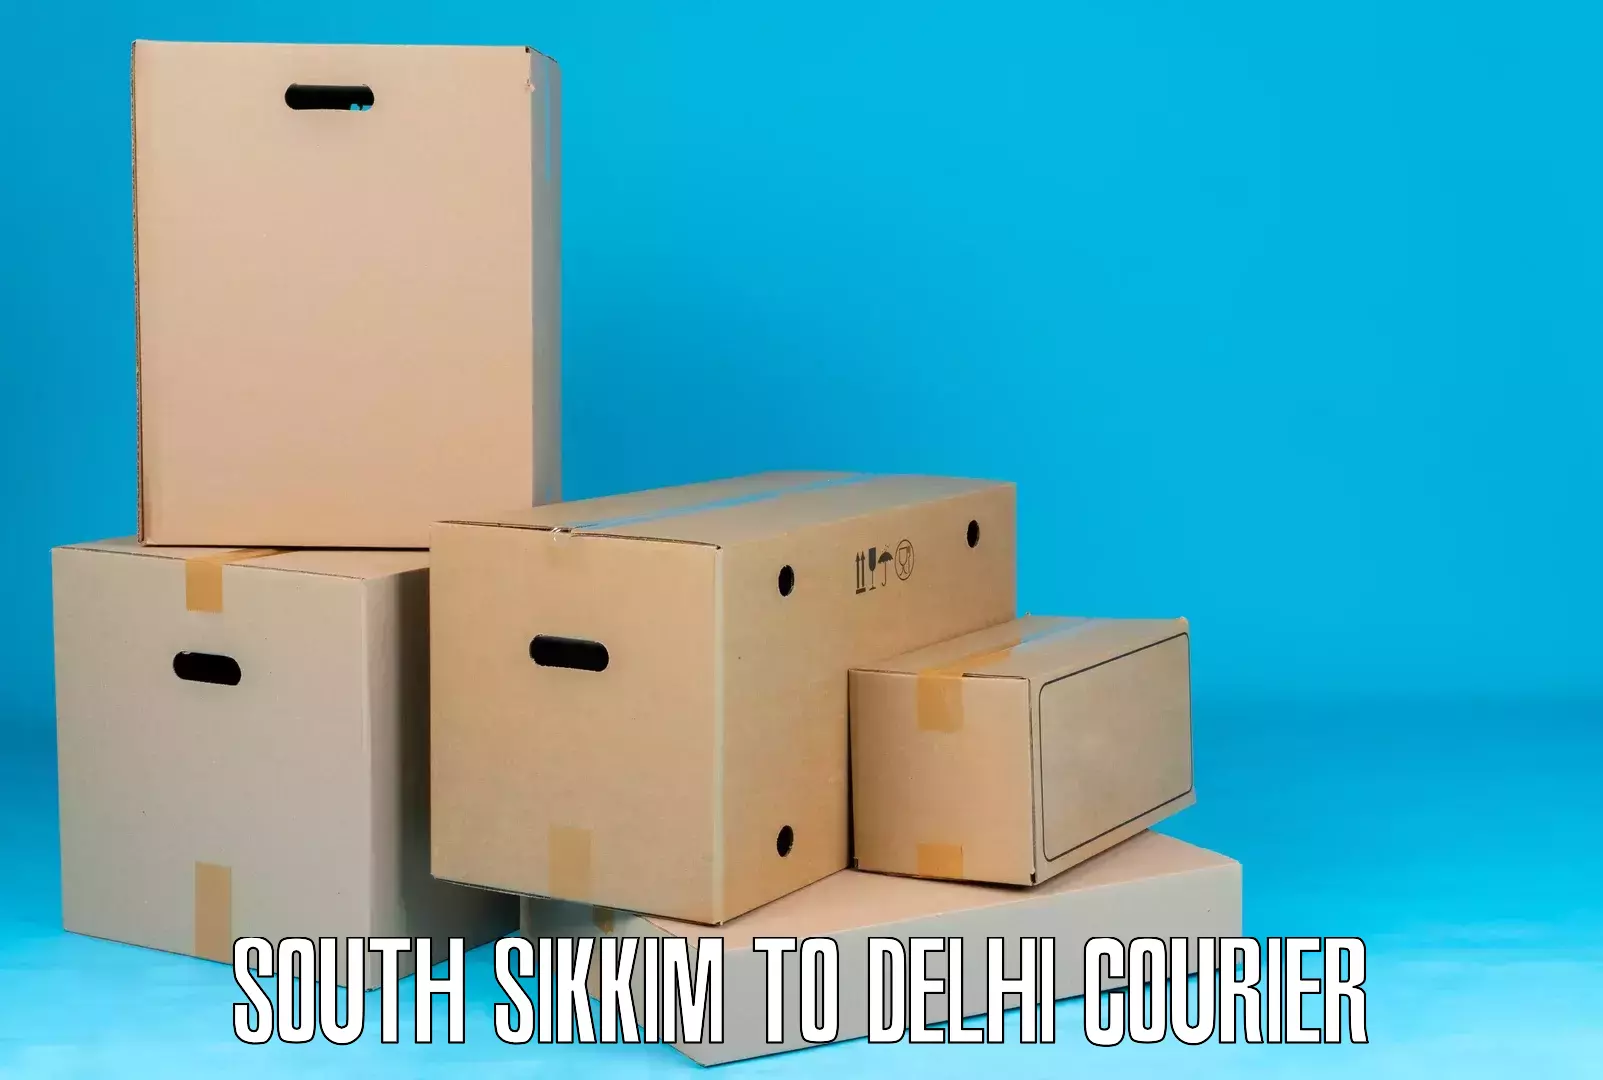 Quality courier partnerships South Sikkim to Burari